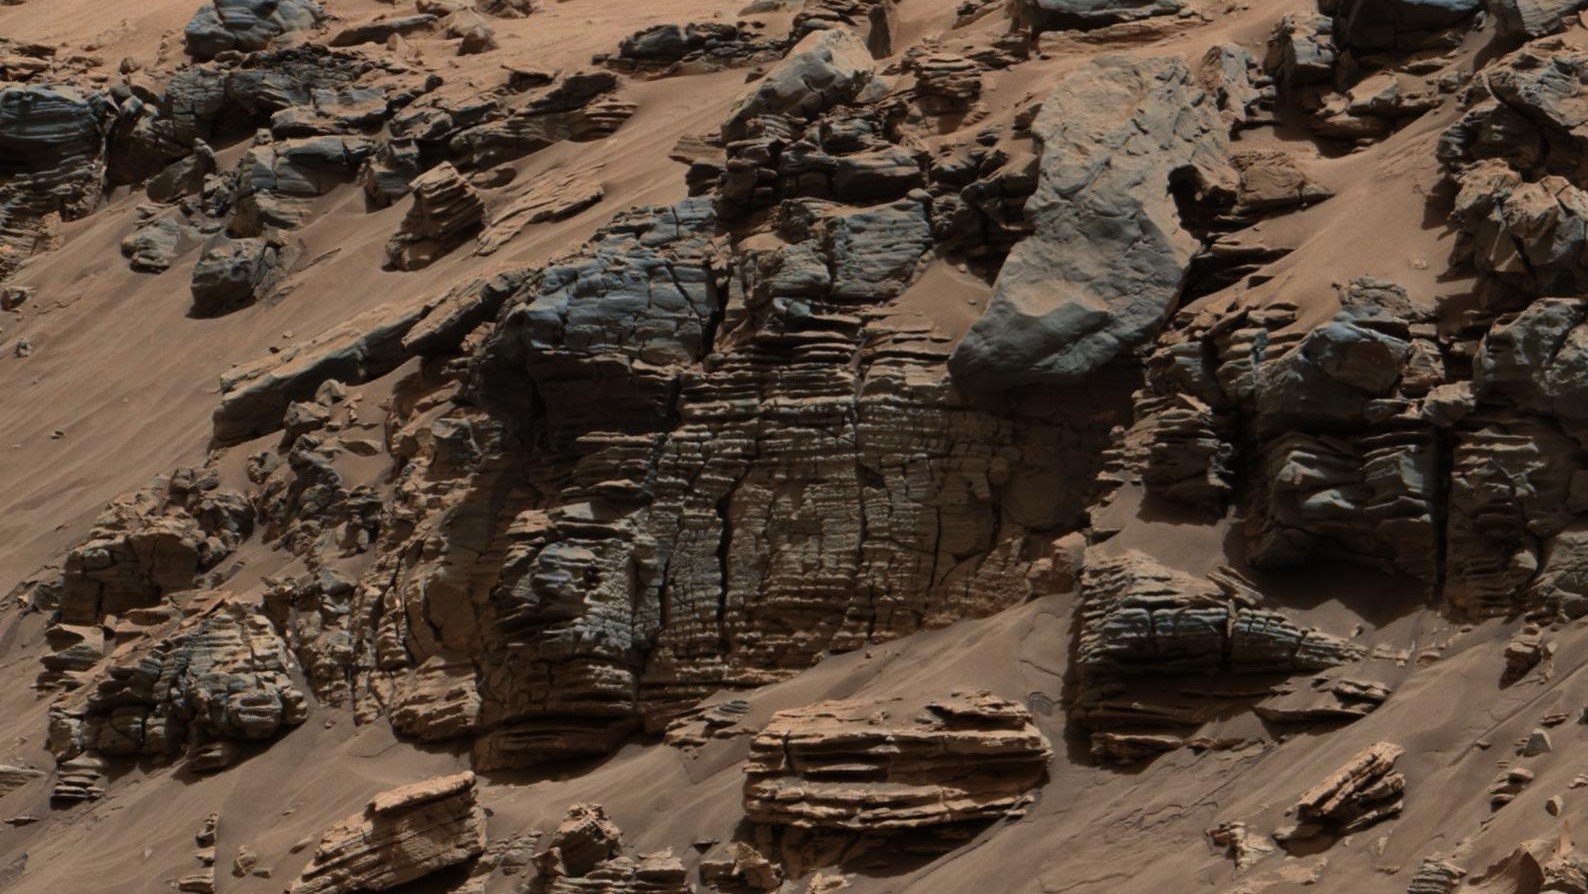 Sedimentary Signs of a Martian Lakebed (Shallow Part)